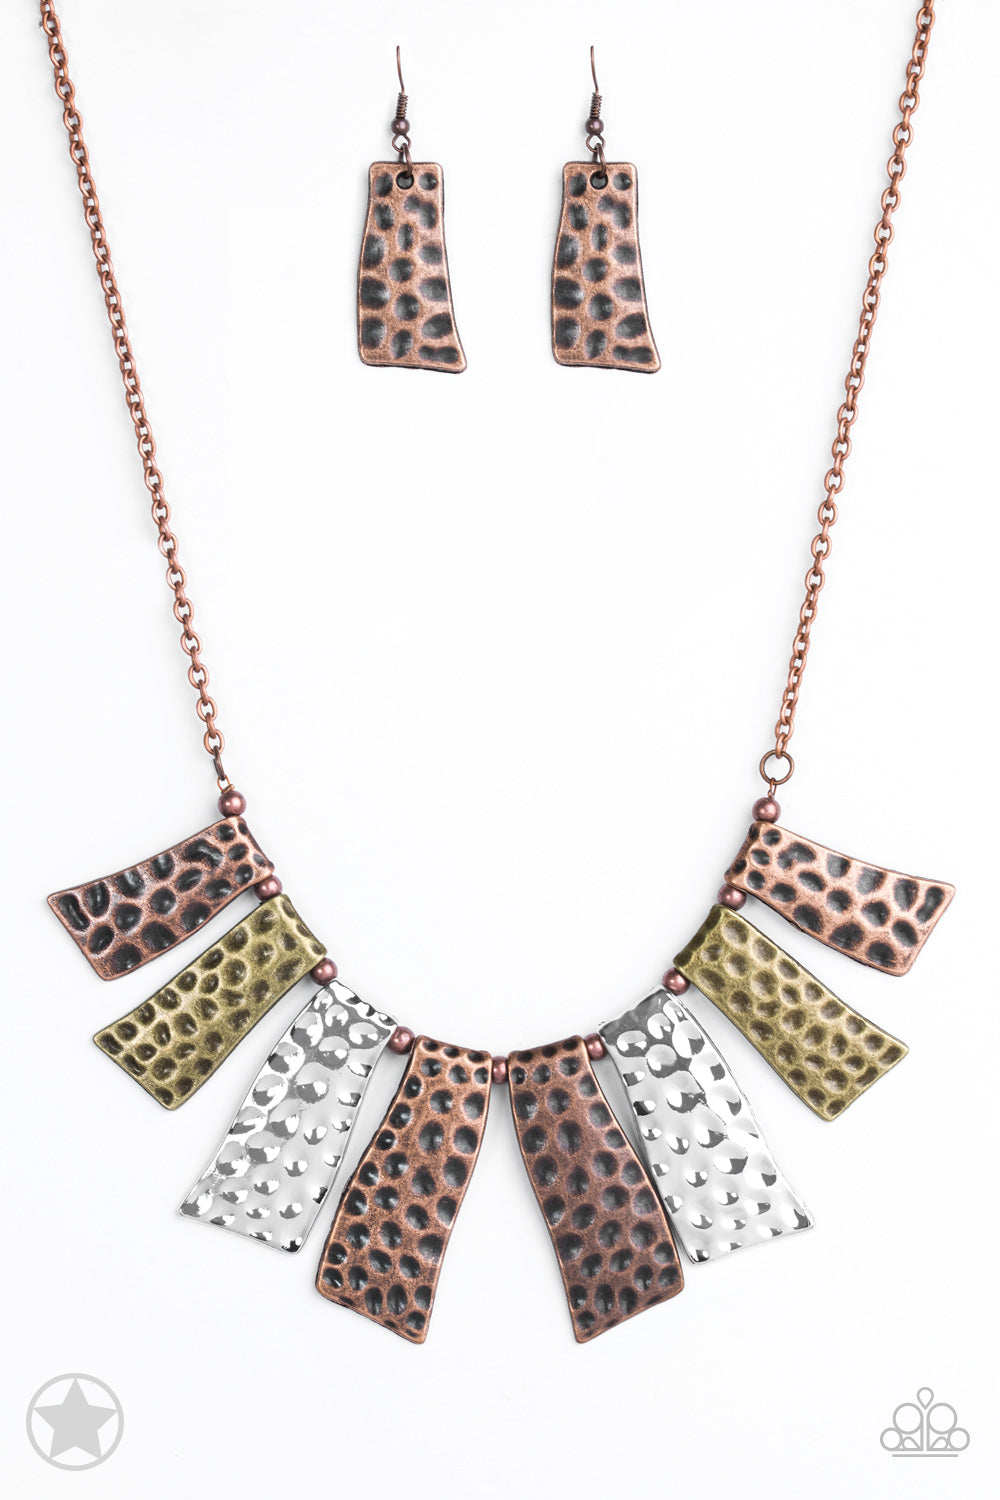 A Fan of the Tribe - Multi Metal Necklace Set